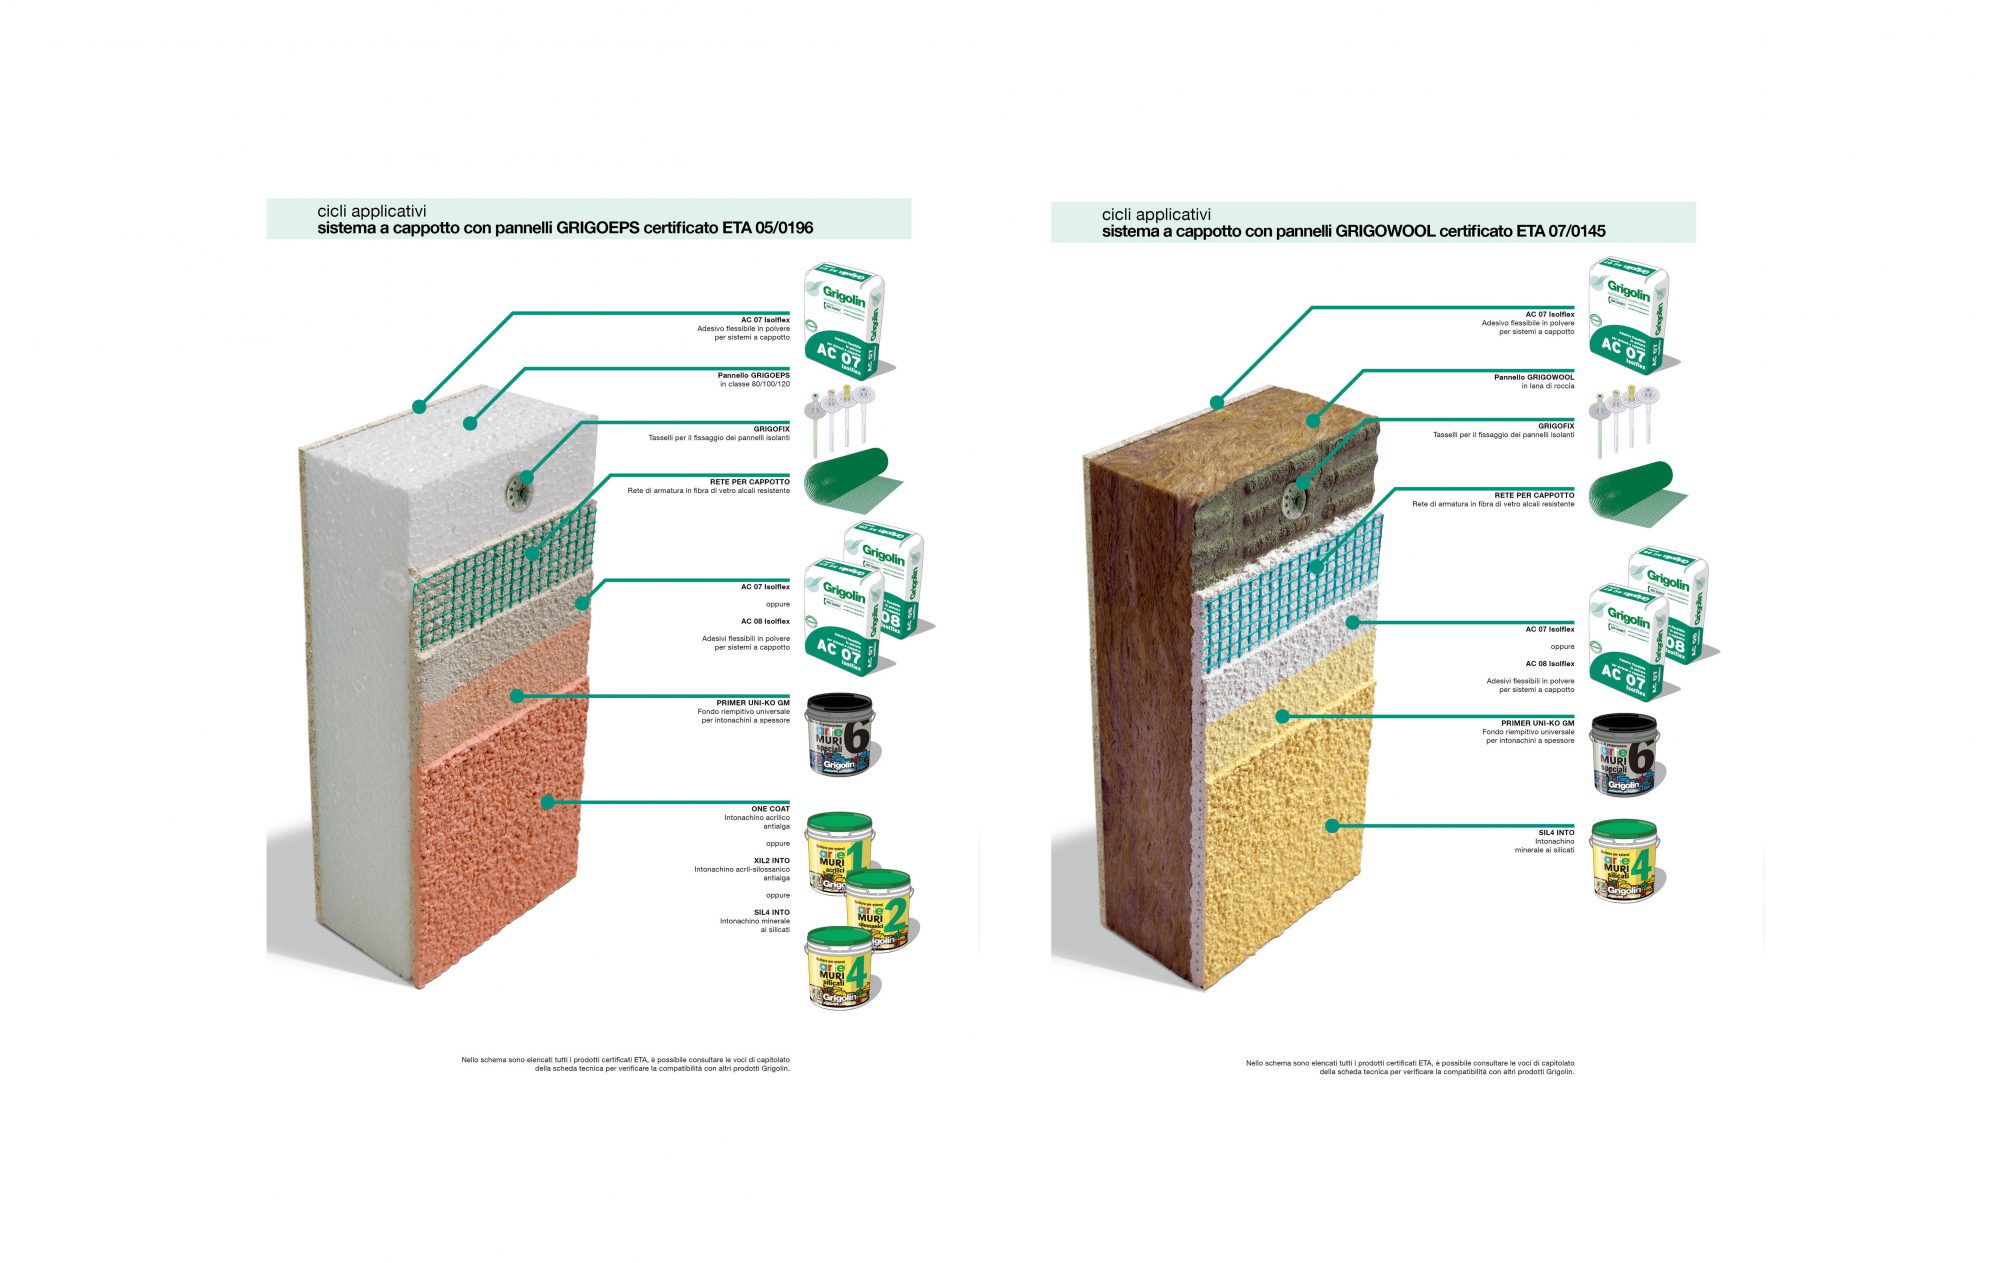 Thermal insulation with coat systems